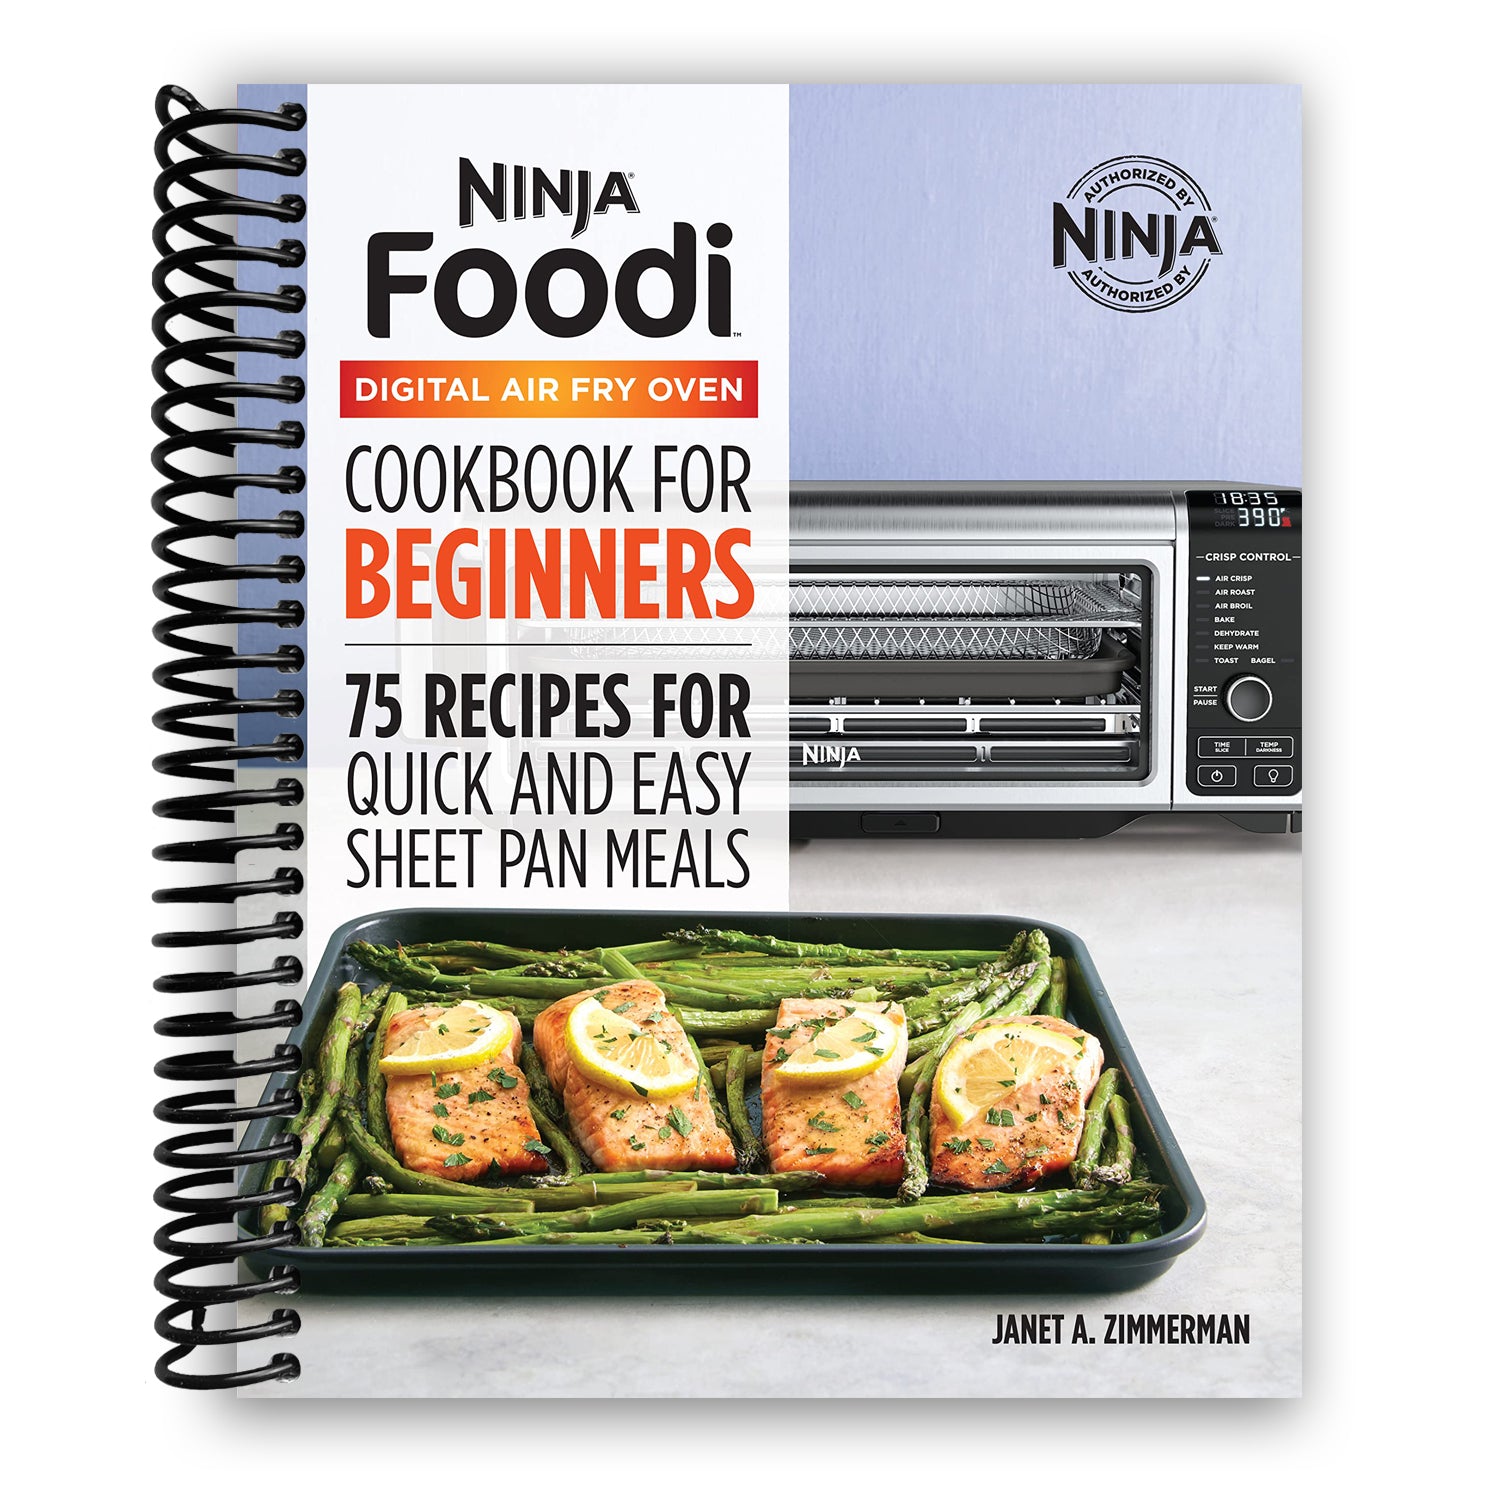 The Official Ninja Air Fryer Cookbook for Beginners: 75+ Recipes